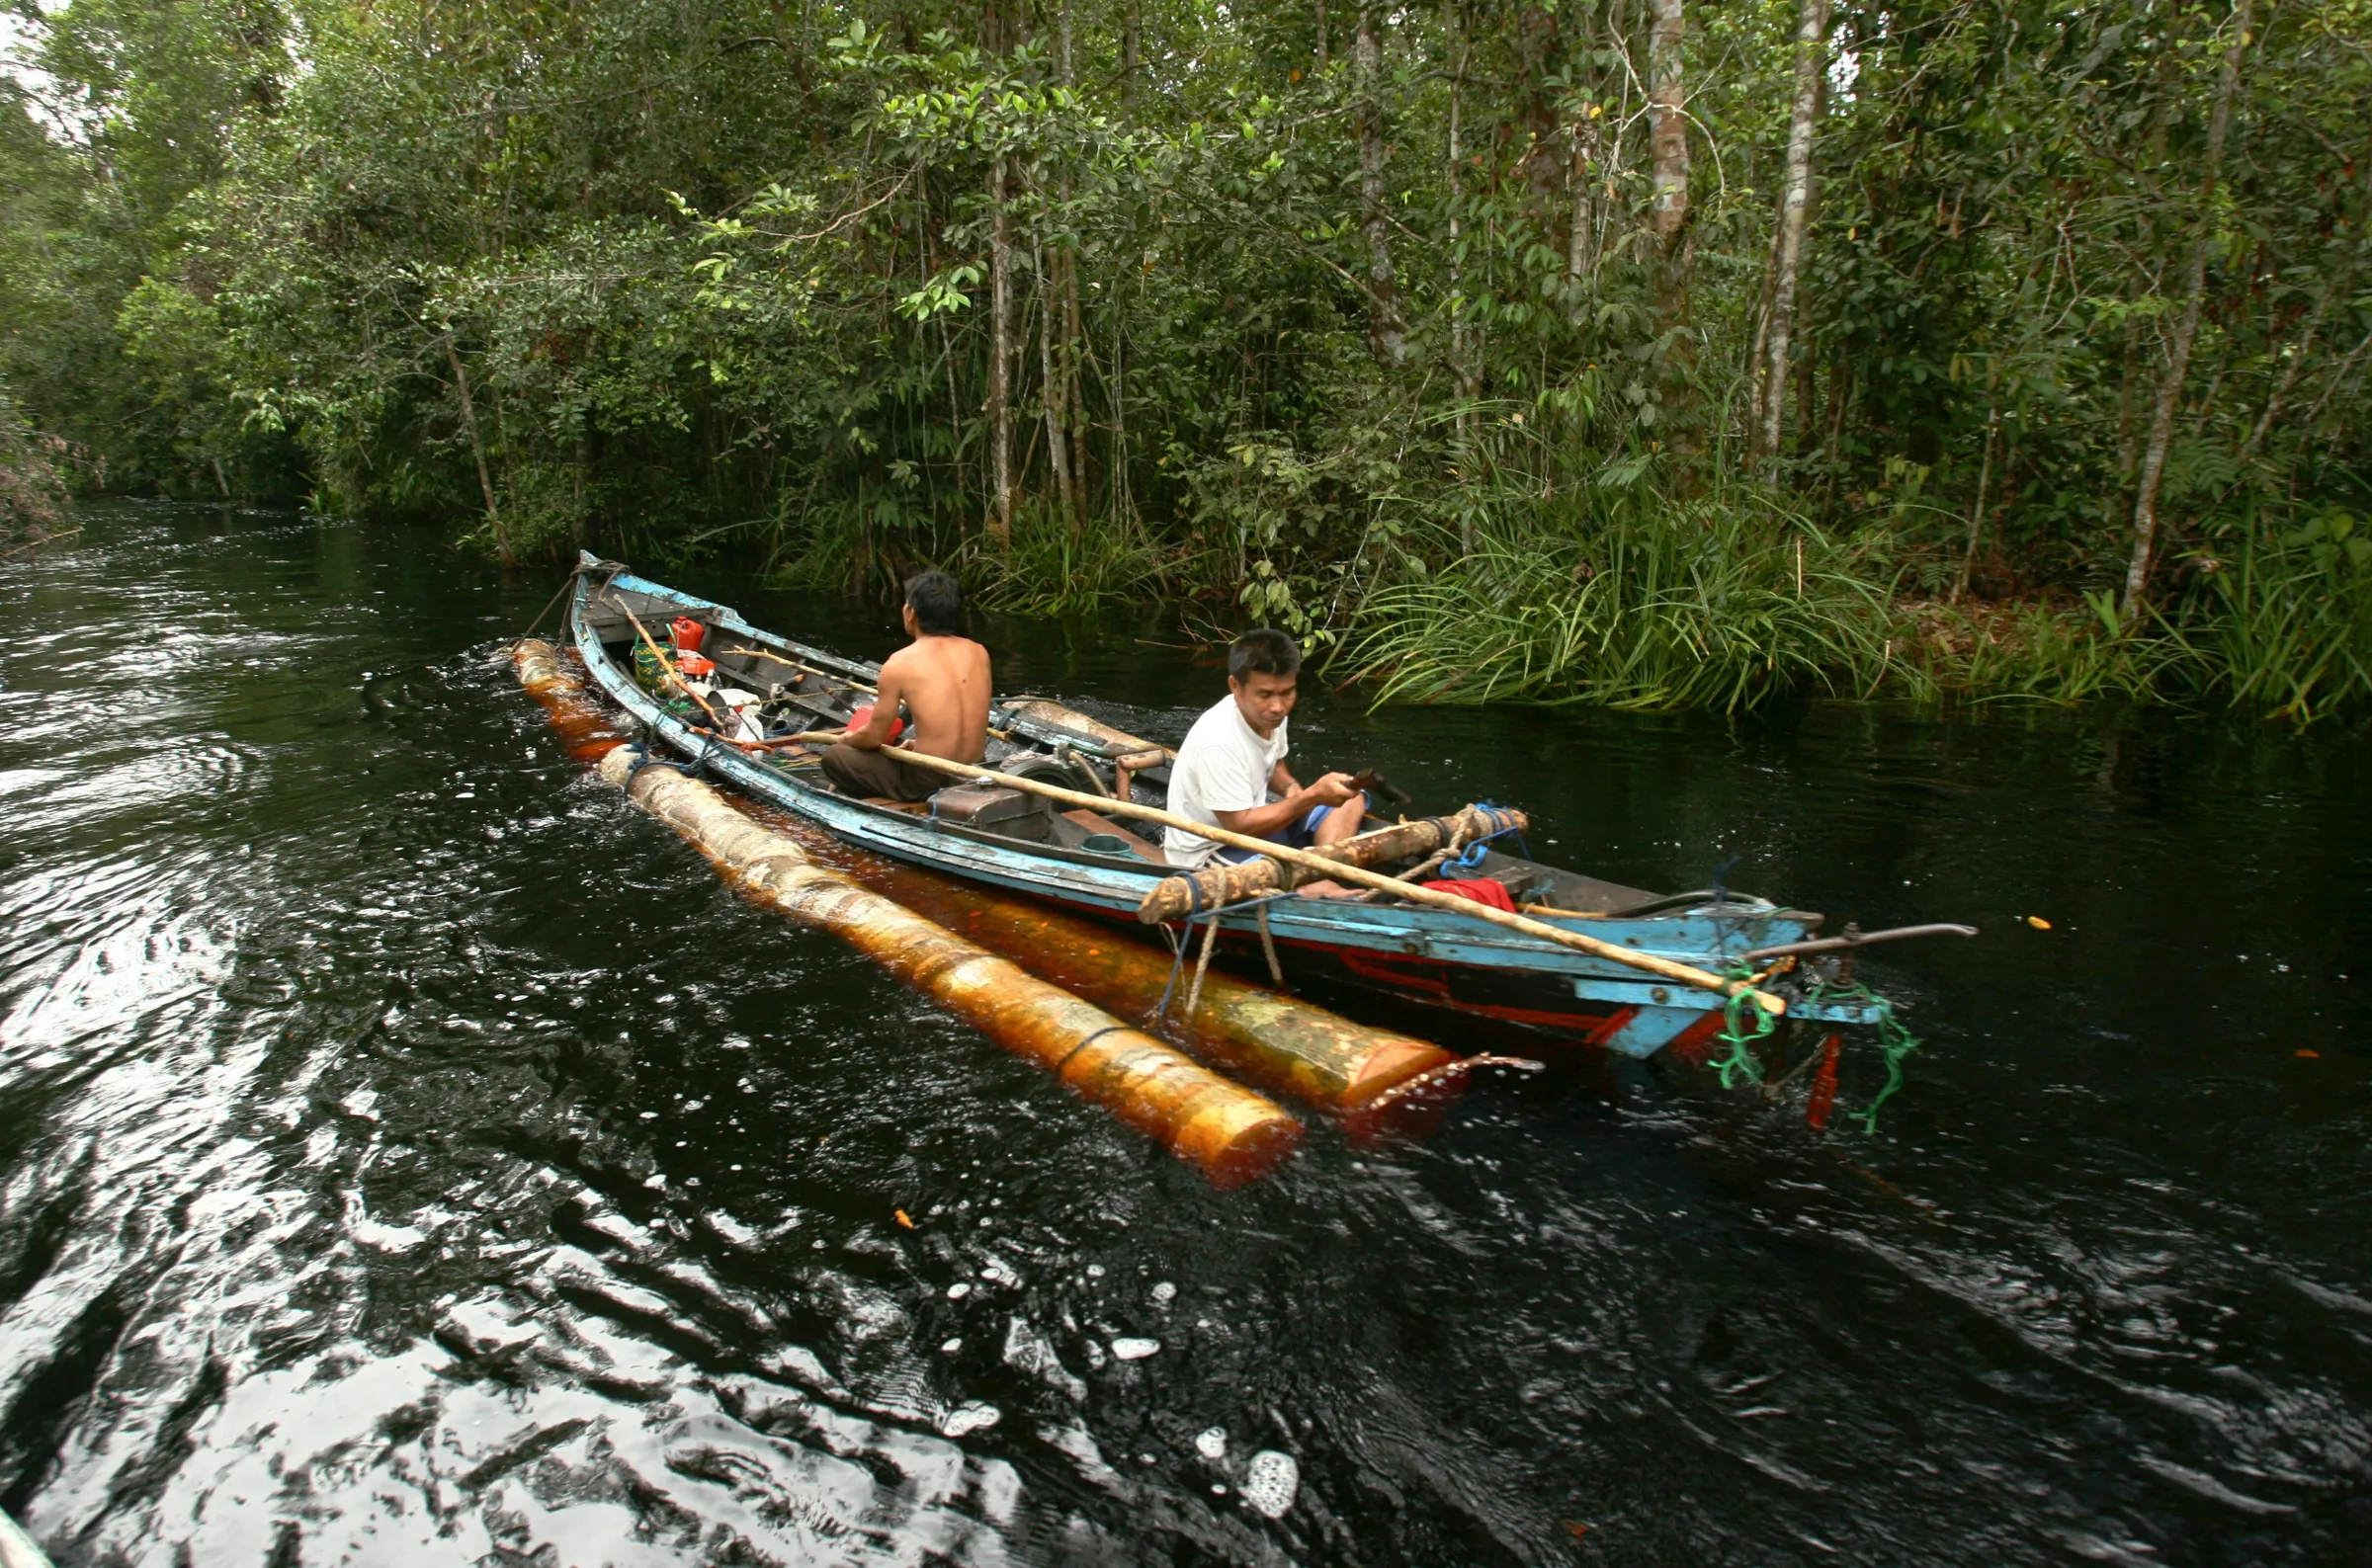 Illegal loggers remove timber along a river in a forest south of Sampit in Indonesia's Central Kalimantan province November 13, 2010